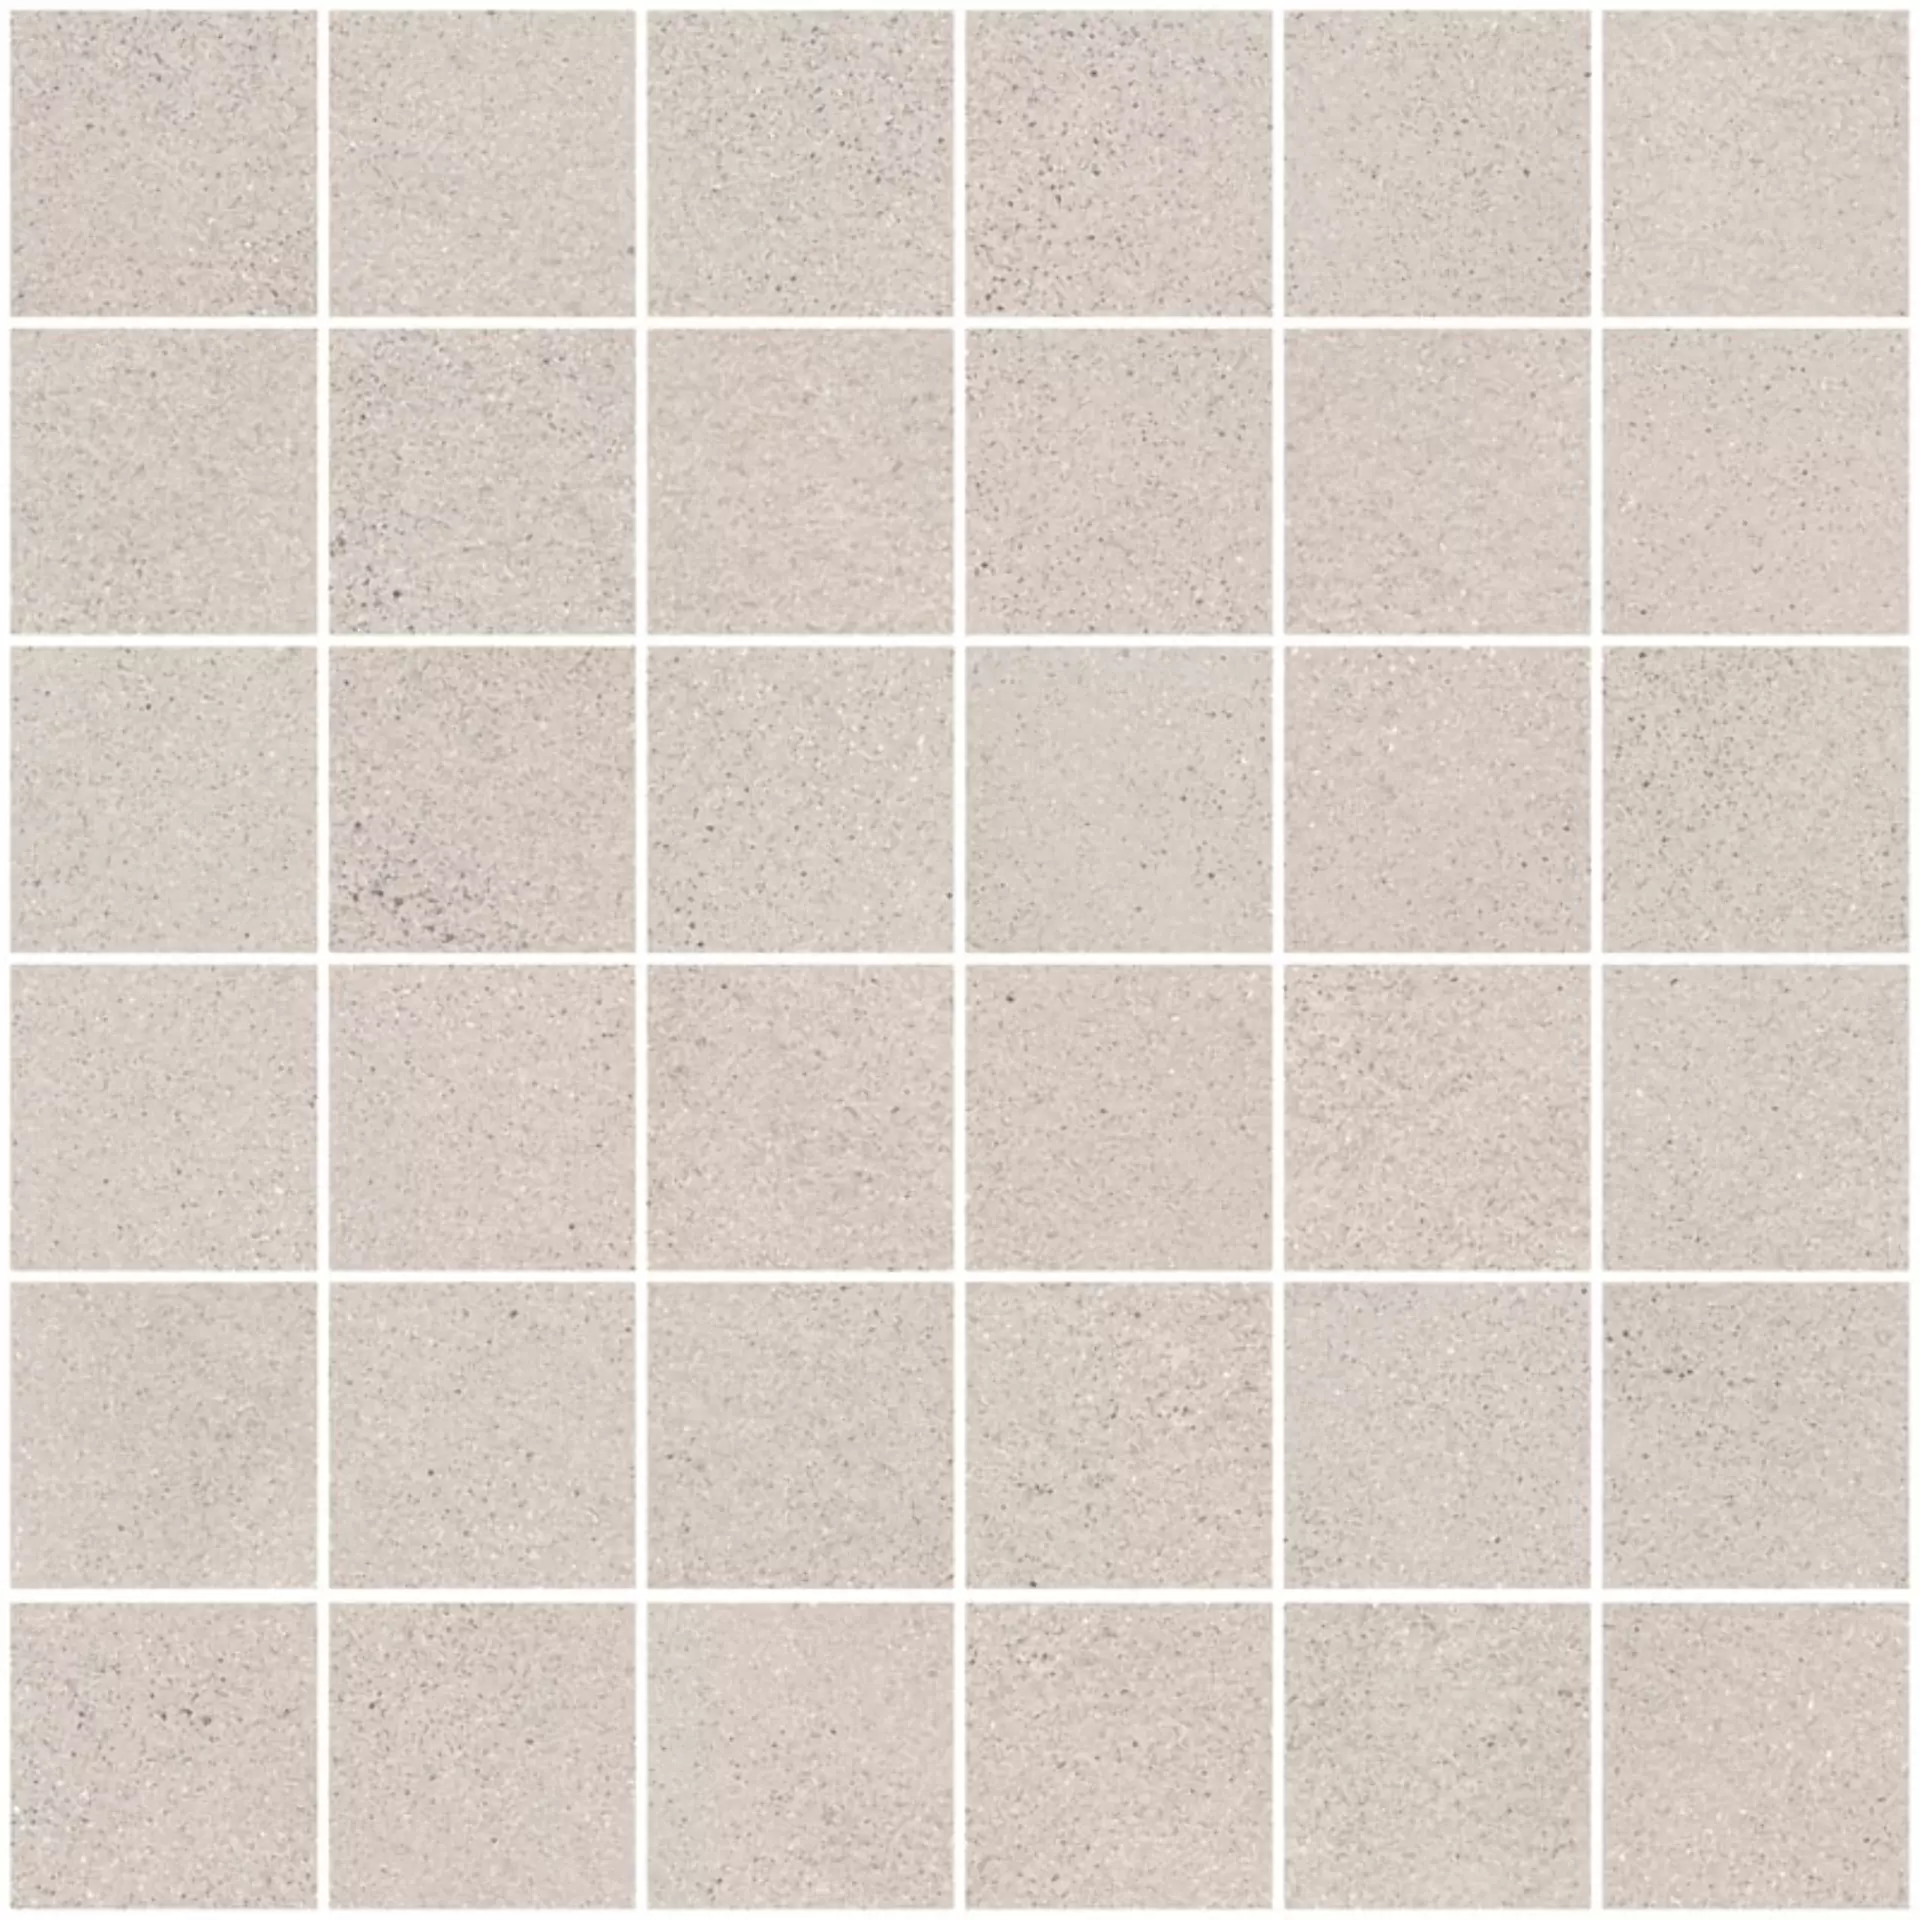 Sant Agostino Sable Cement Natural Mosaic CSAMSACE30 30x30cm rectified 10mm